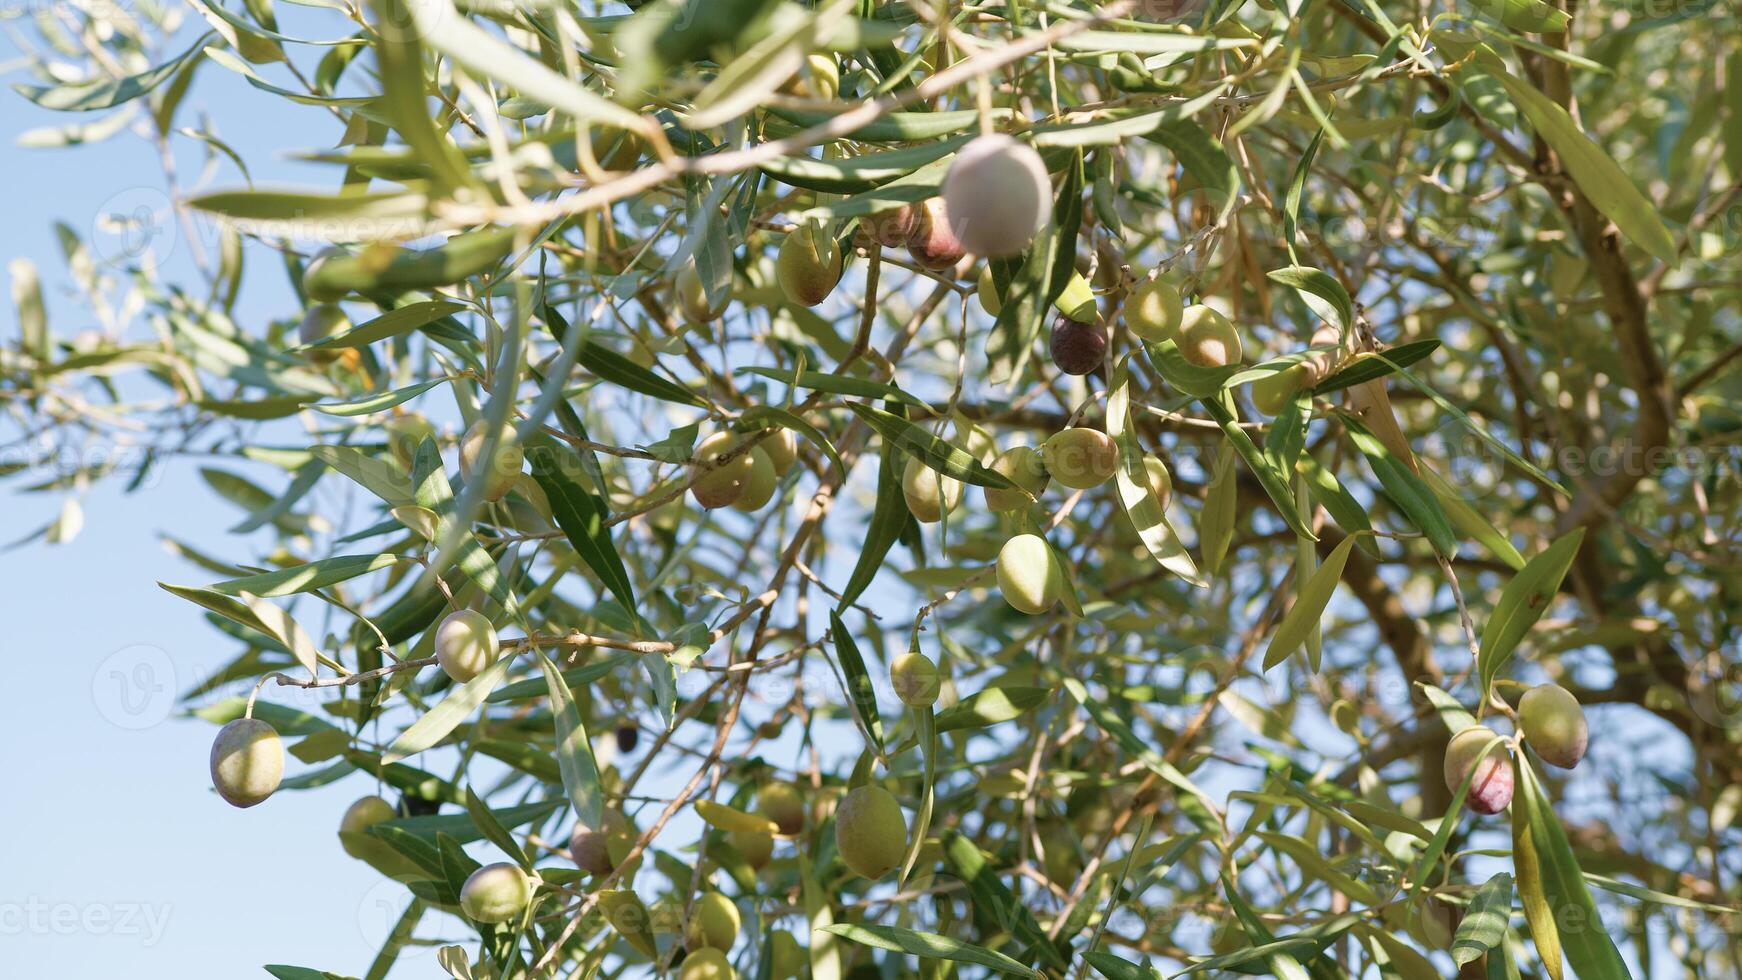 Ripe olives on tree branch photo